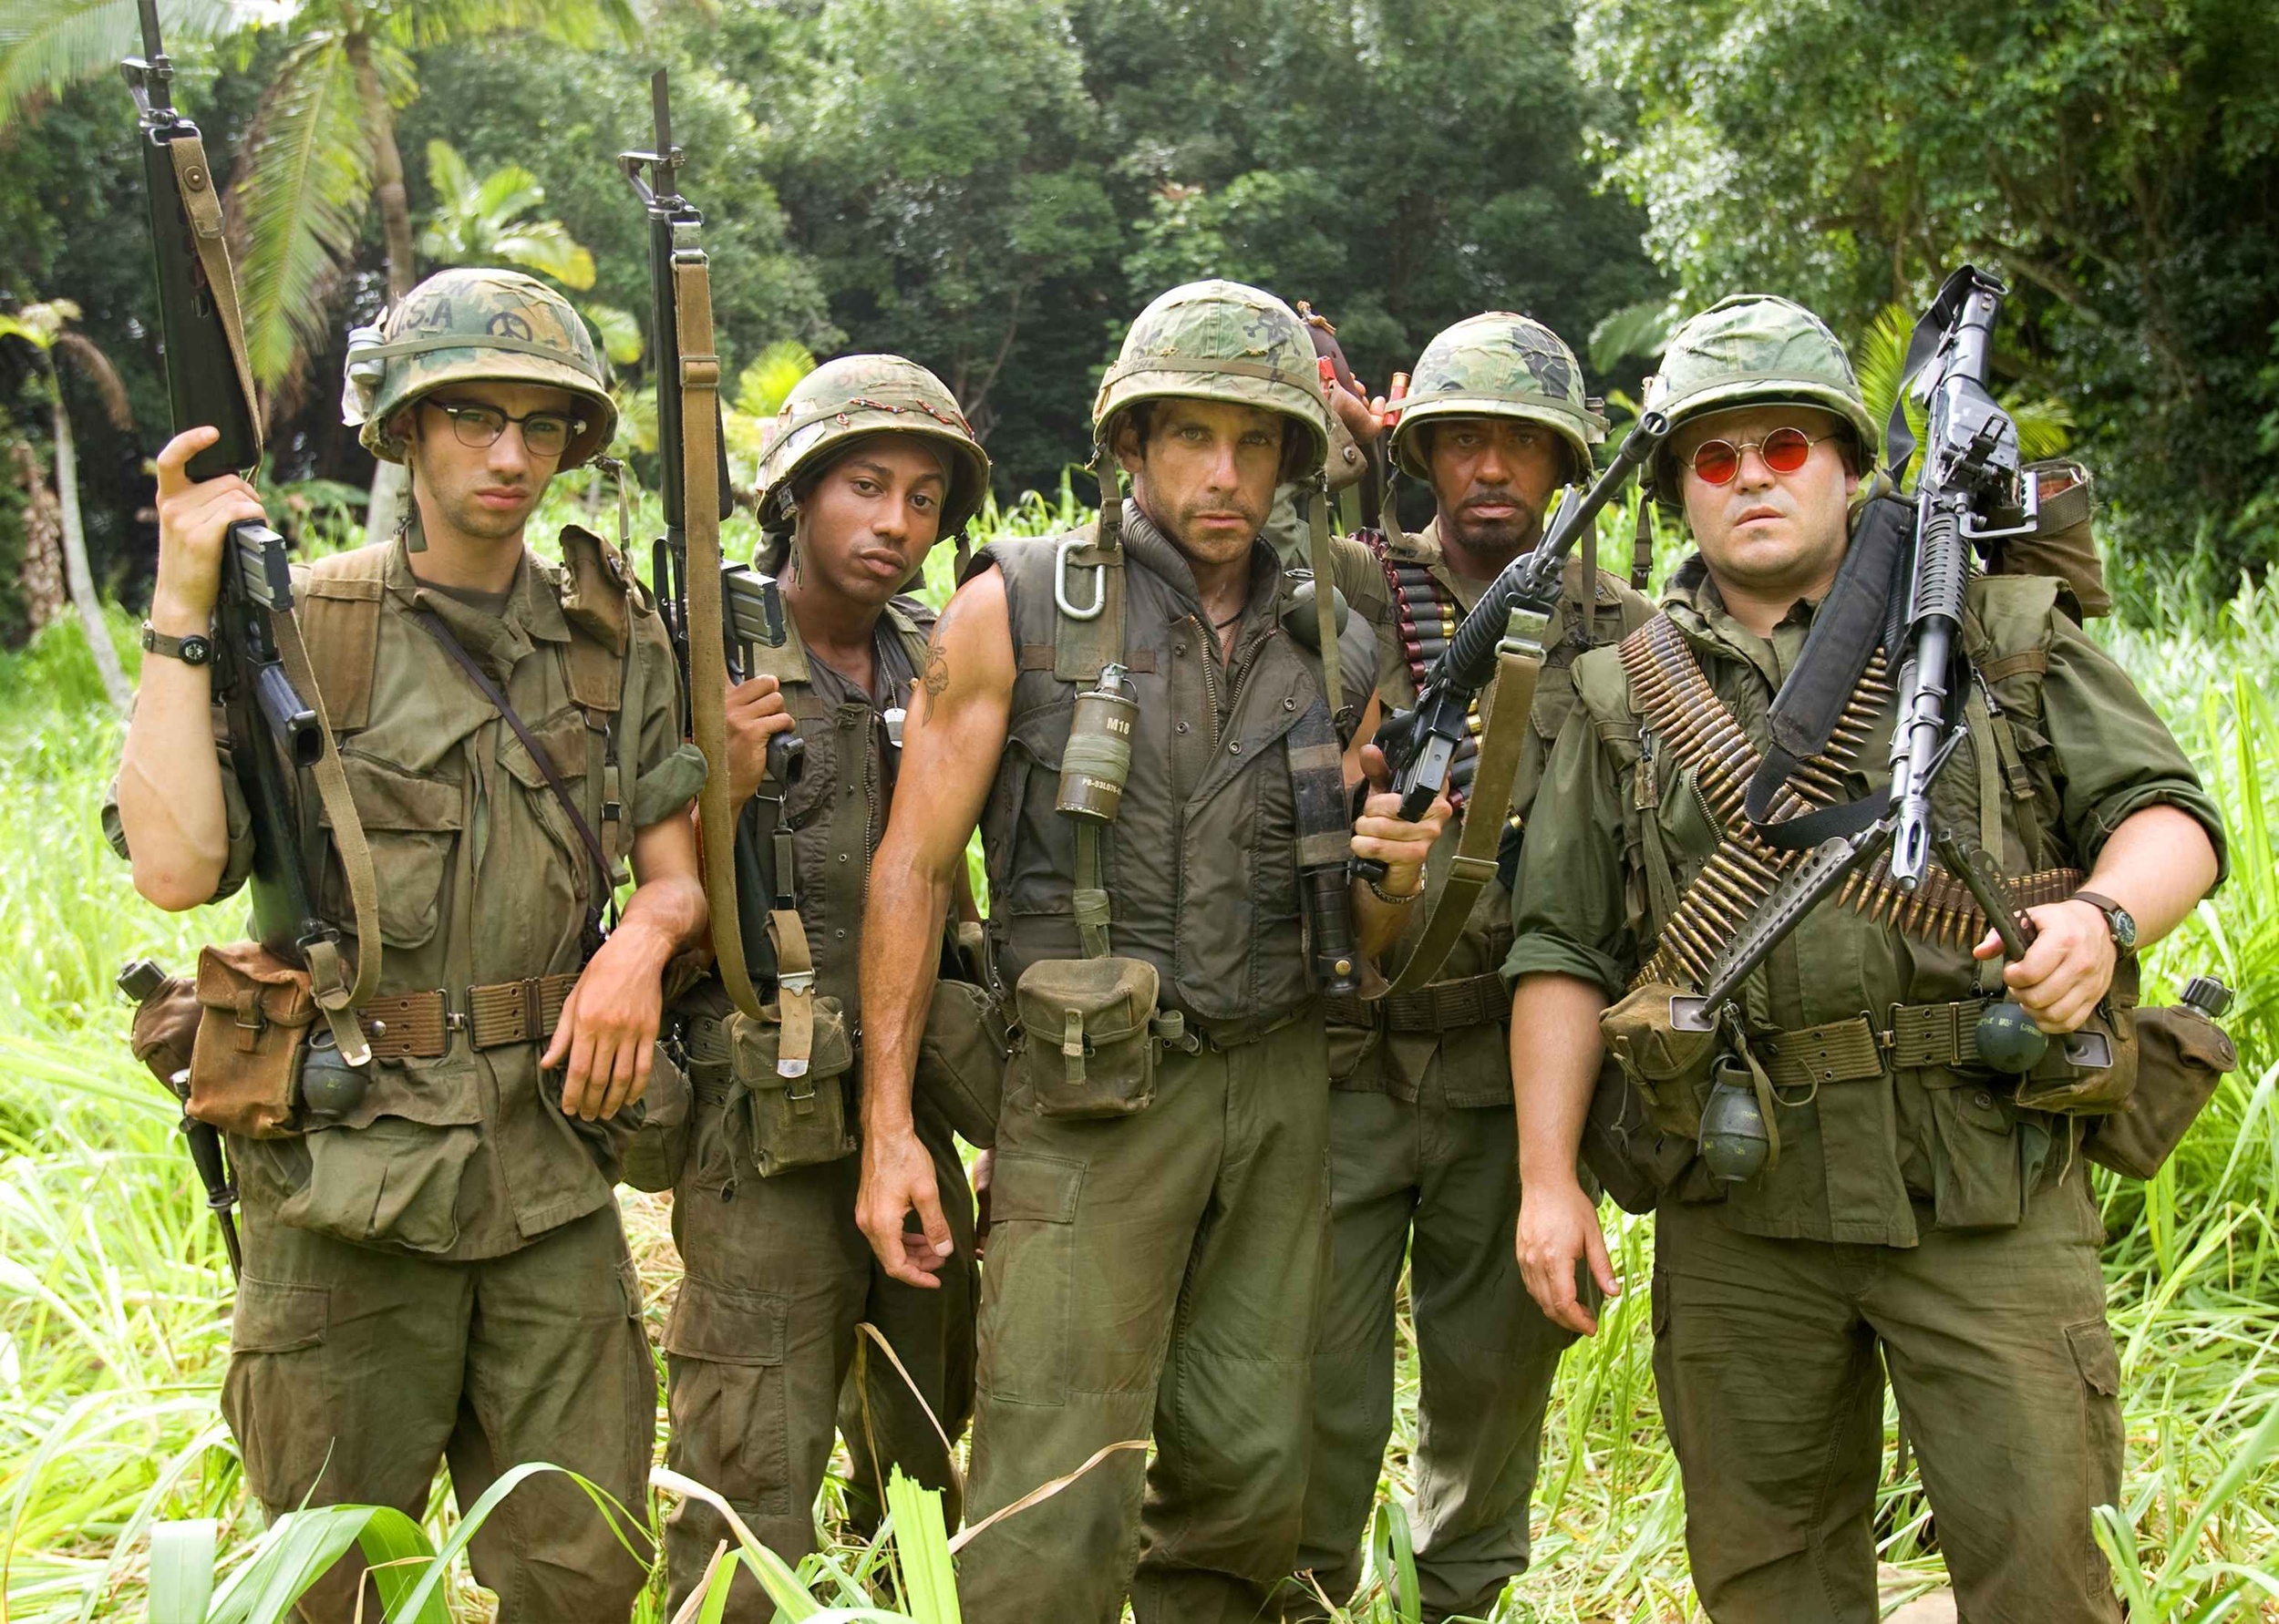 <p><em>Tropic Thunder</em> was always going to be about actors taking themselves too seriously, but the nature of the plot changed. Initially, the script was about actors who go to a boot camp and return with PTSD. Then, they pivoted to a version of the story that could also lampoon war movies. The proliferation of celebrity news and companies like TMZ over the years helped make writing the script easier since Stiller and Theroux realized moviegoers would be more aware of the inner workings of Hollywood.</p><p>You may also like: <a href='https://www.yardbarker.com/entertainment/articles/the_ultimate_karol_g_playlist_022324/s1__39931626'>The ultimate Karol G playlist</a></p>